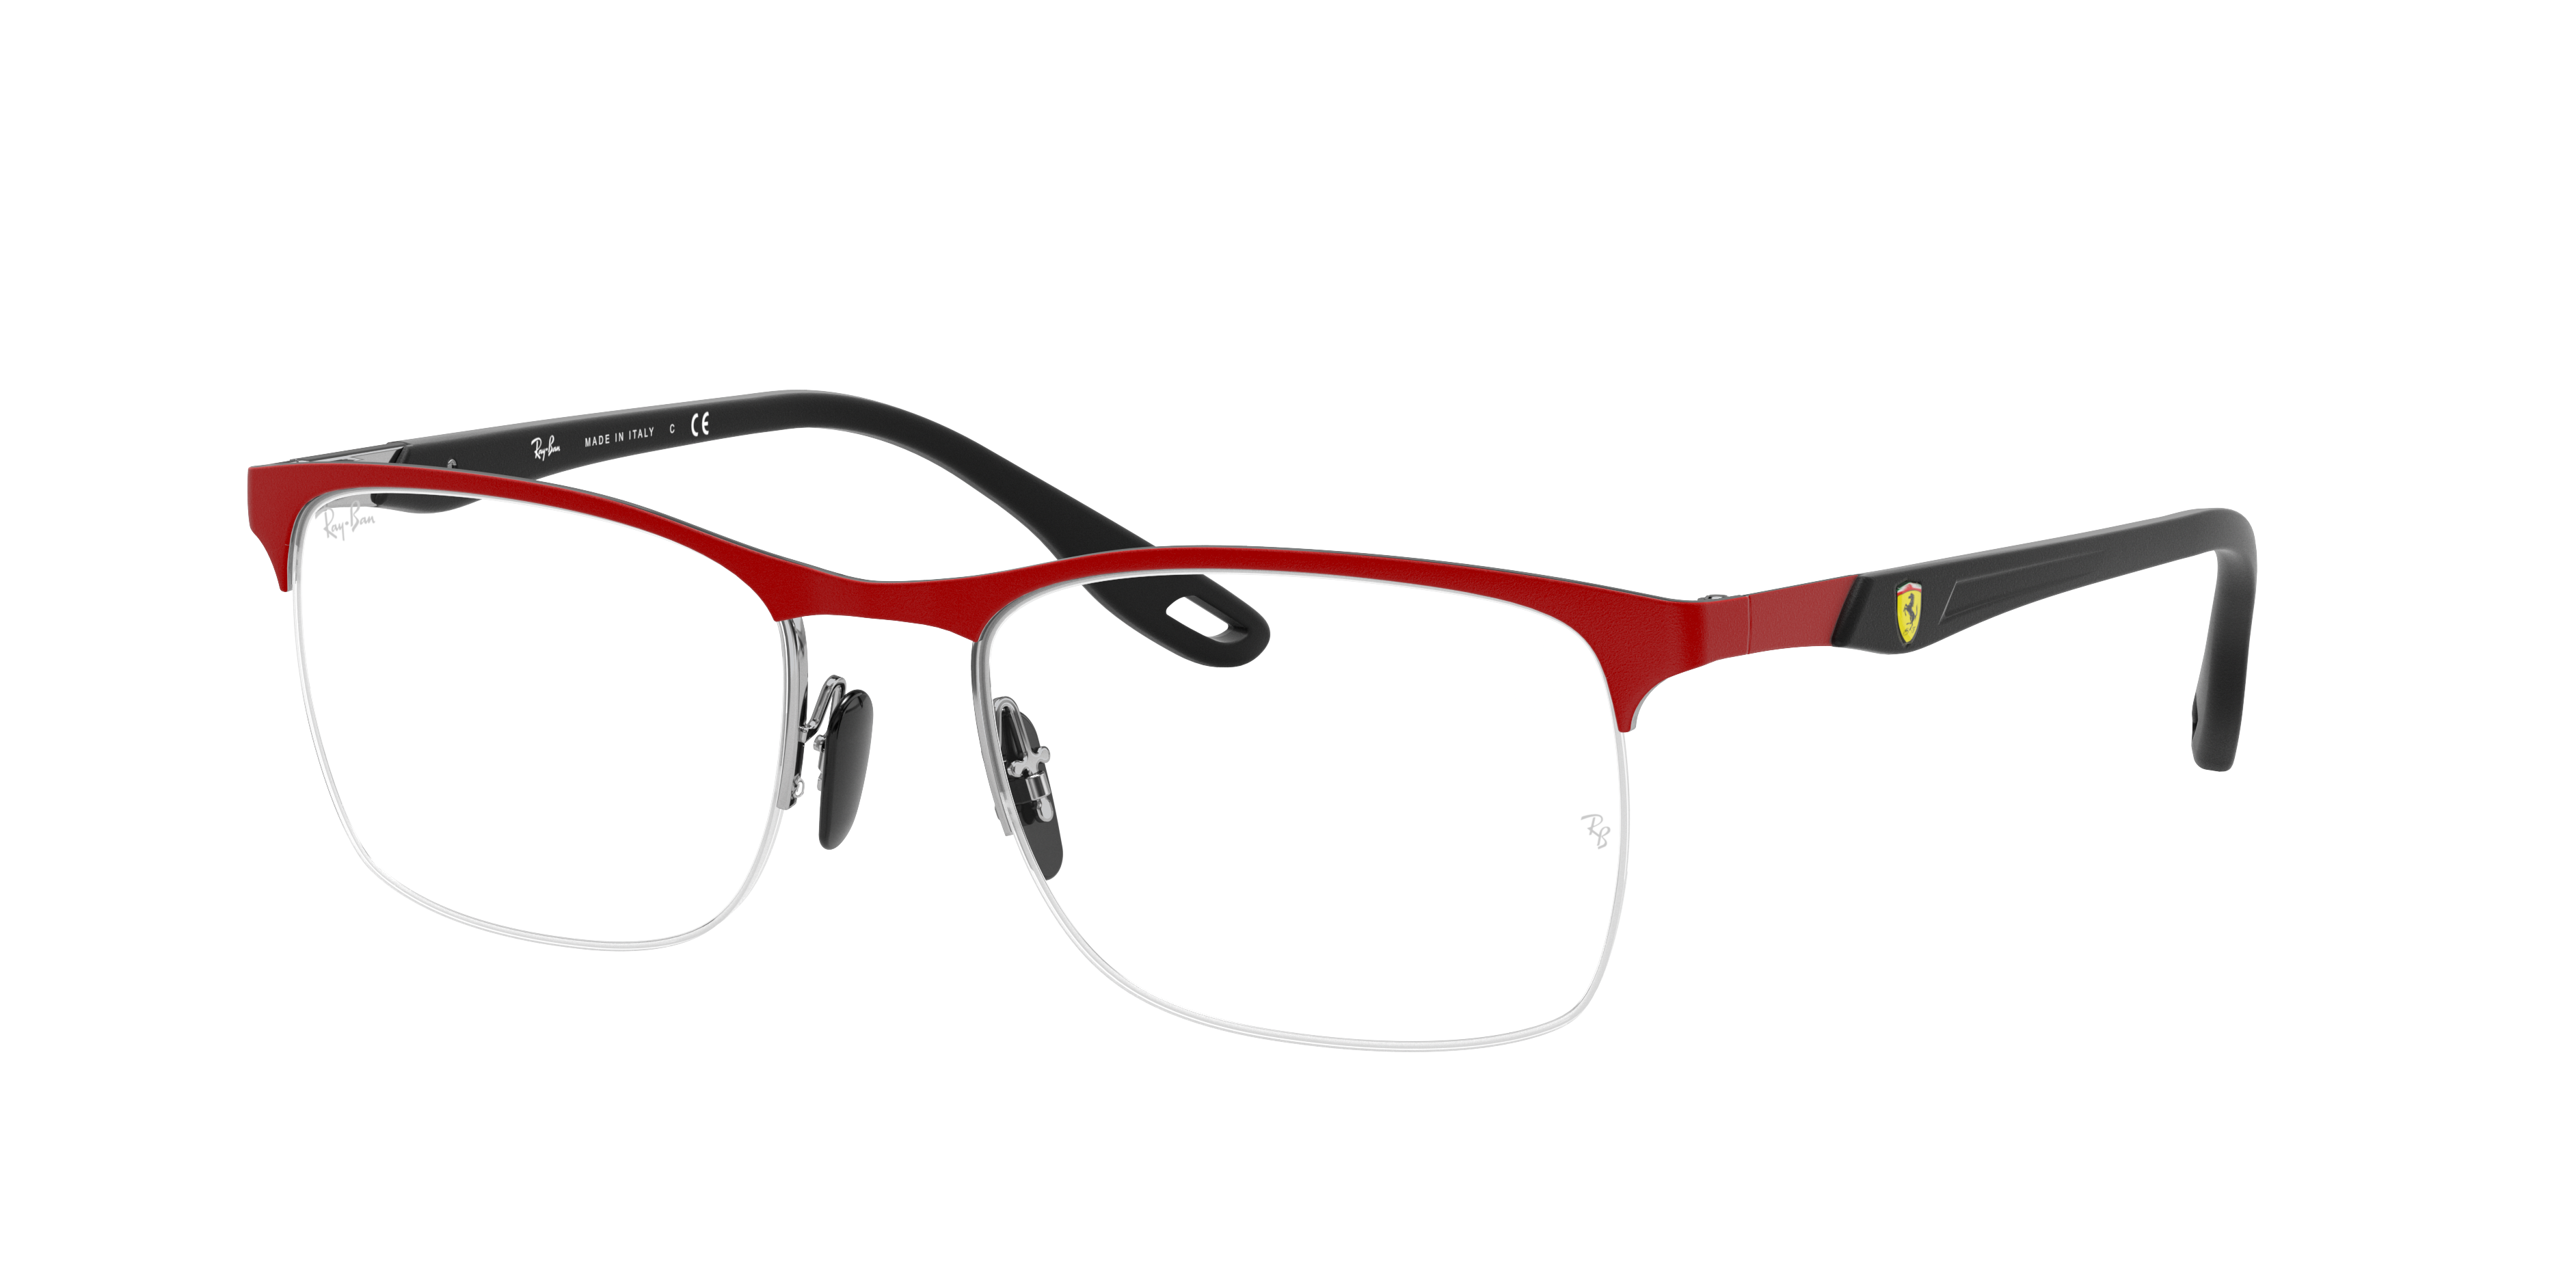 Rb8416m Scuderia Ferrari Collection Eyeglasses with Red Frame | Ray-Ban®